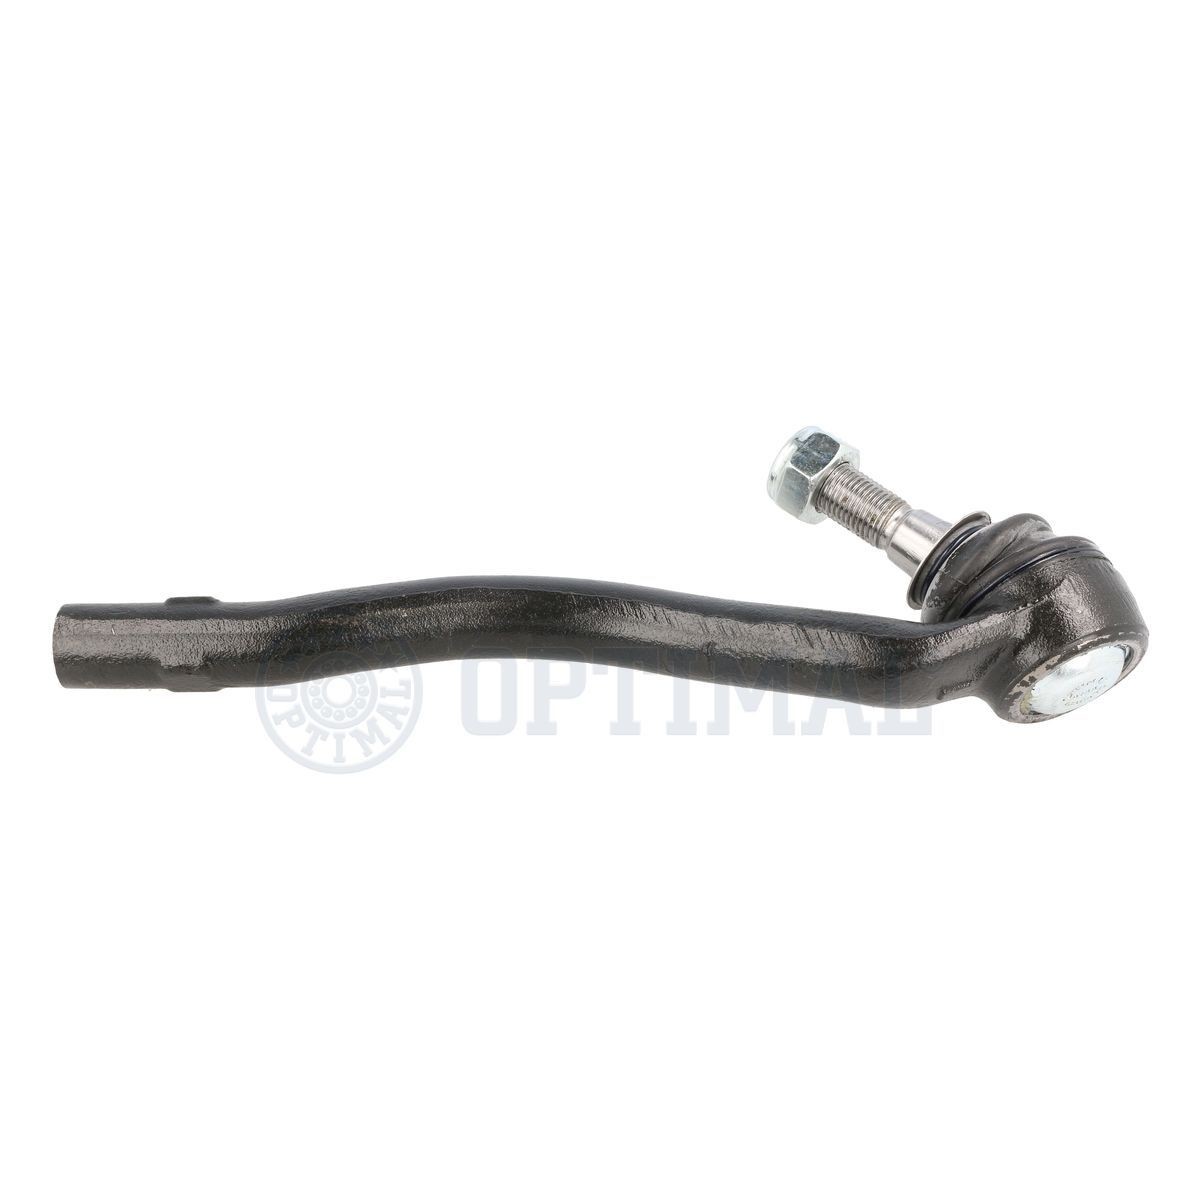 OPTIMAL Outer tie rod G1-1547 suitable for MERCEDES-BENZ ML-Class, GL